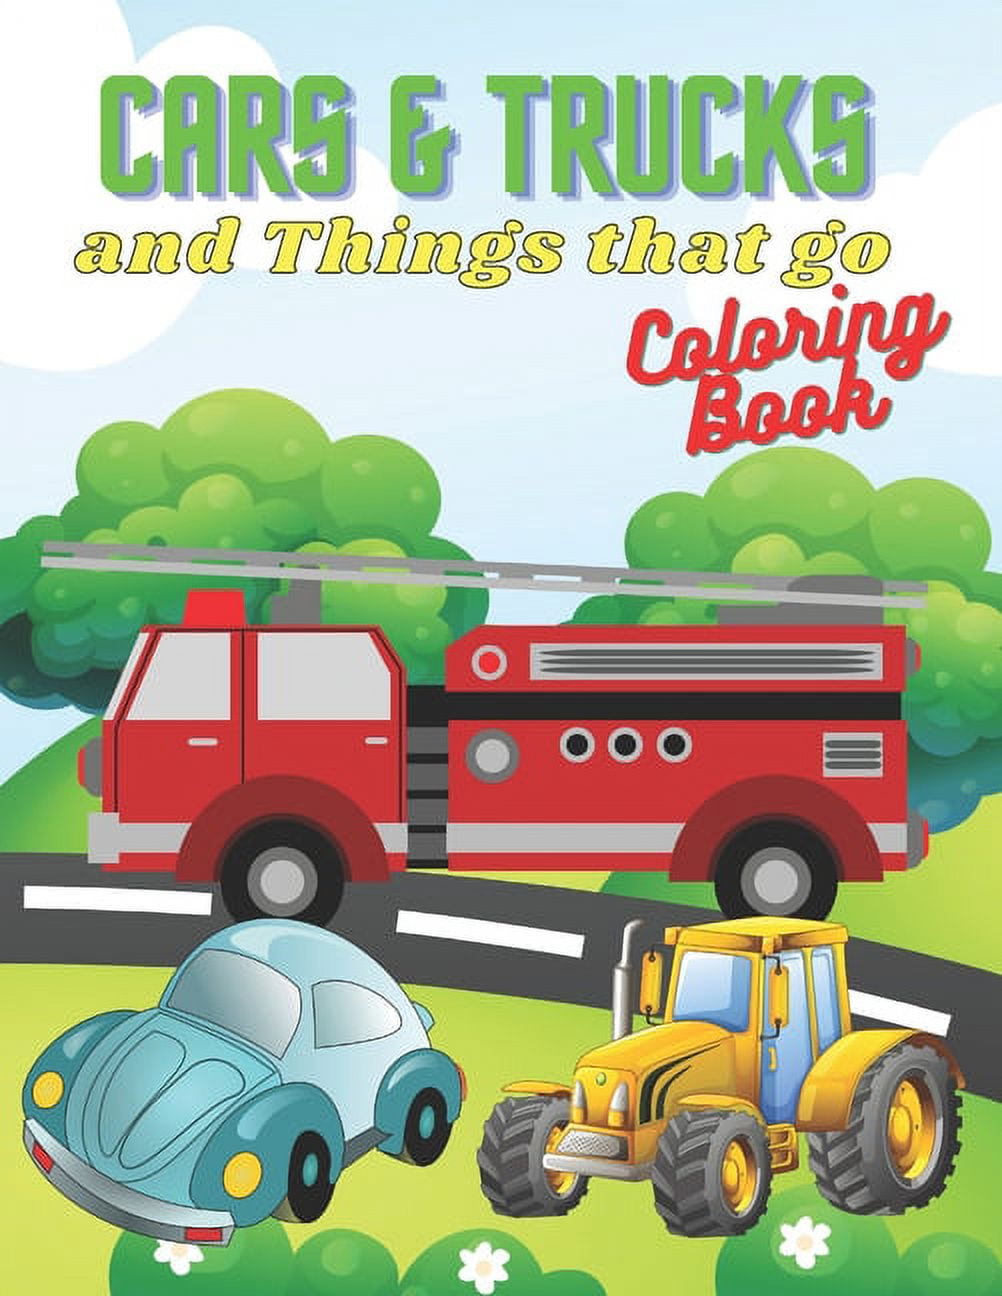 Kids Coloring Books Ages 4-8: COOL CARS, TRUCKS & VEHICLES. Fun, Easy, Things-that-go, Cool Coloring Vehicle Activity Workbook for Boys & Girls Aged 4-6, 3-8, 3-5, 6-8 [Book]